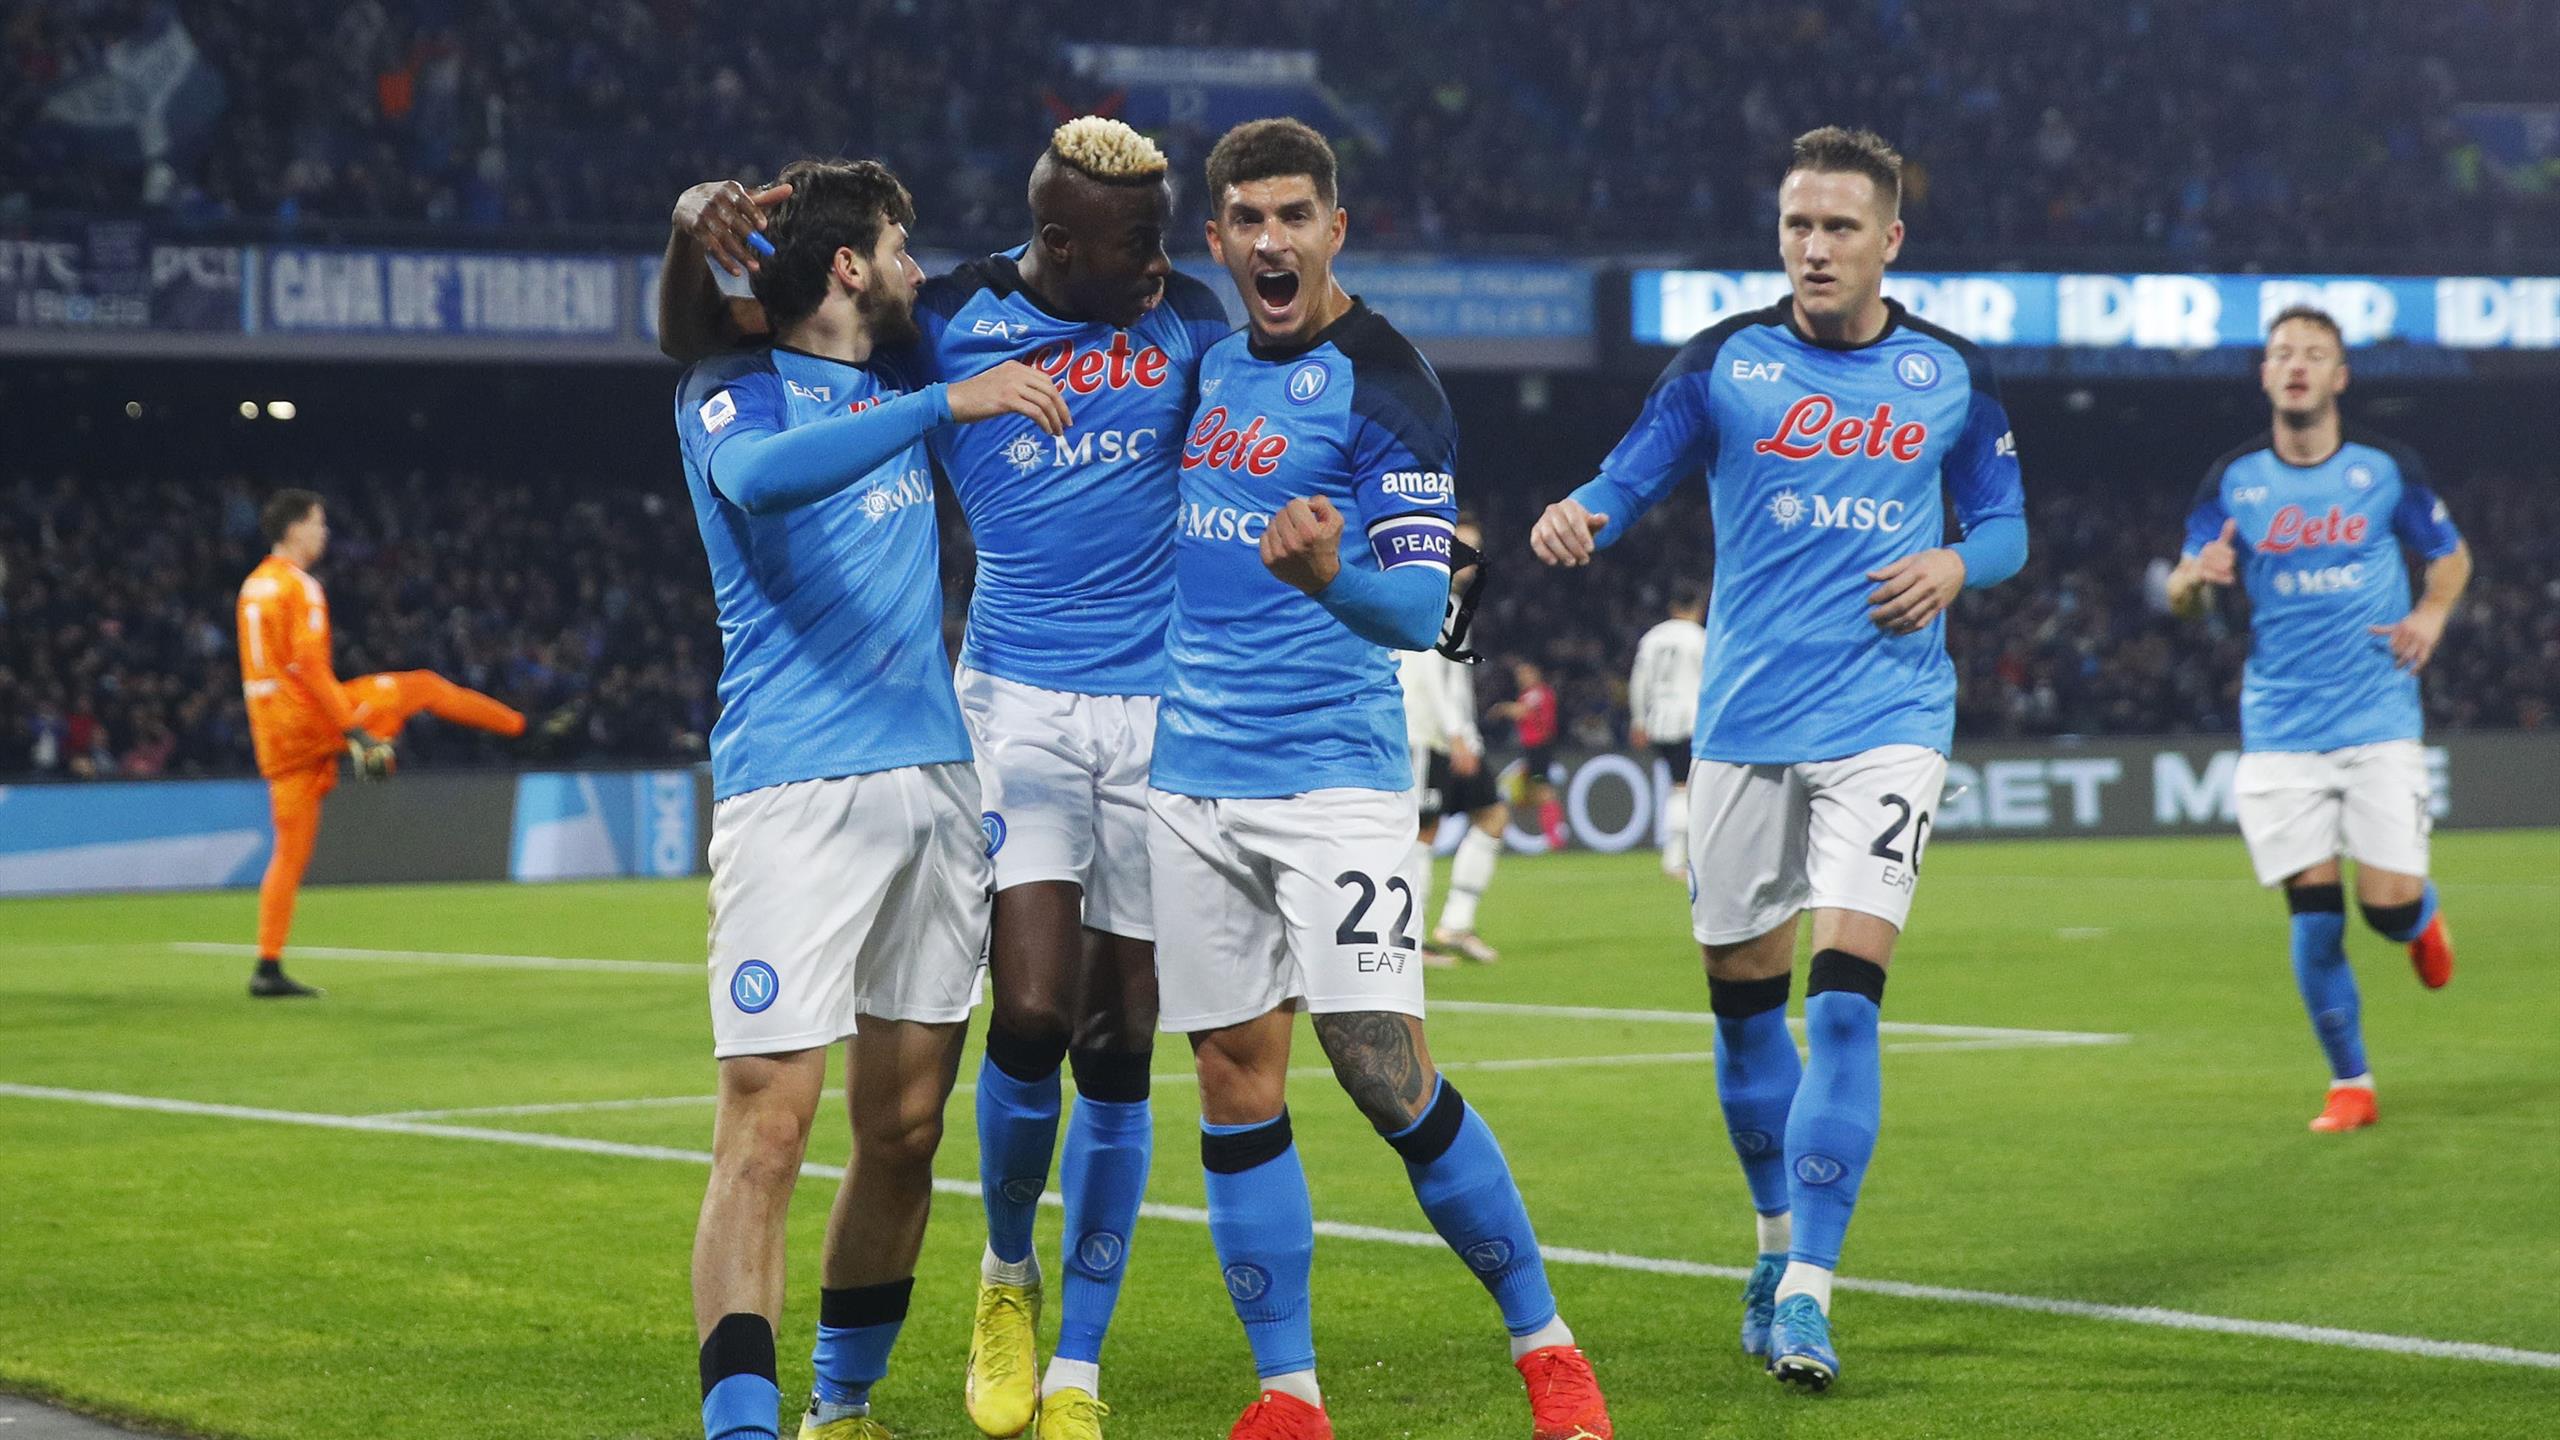 Napoli 5 1 Juventus: Serie A Leaders End Juve Winning Run In Emphatic Fashion To Open Up Ten Point Lead